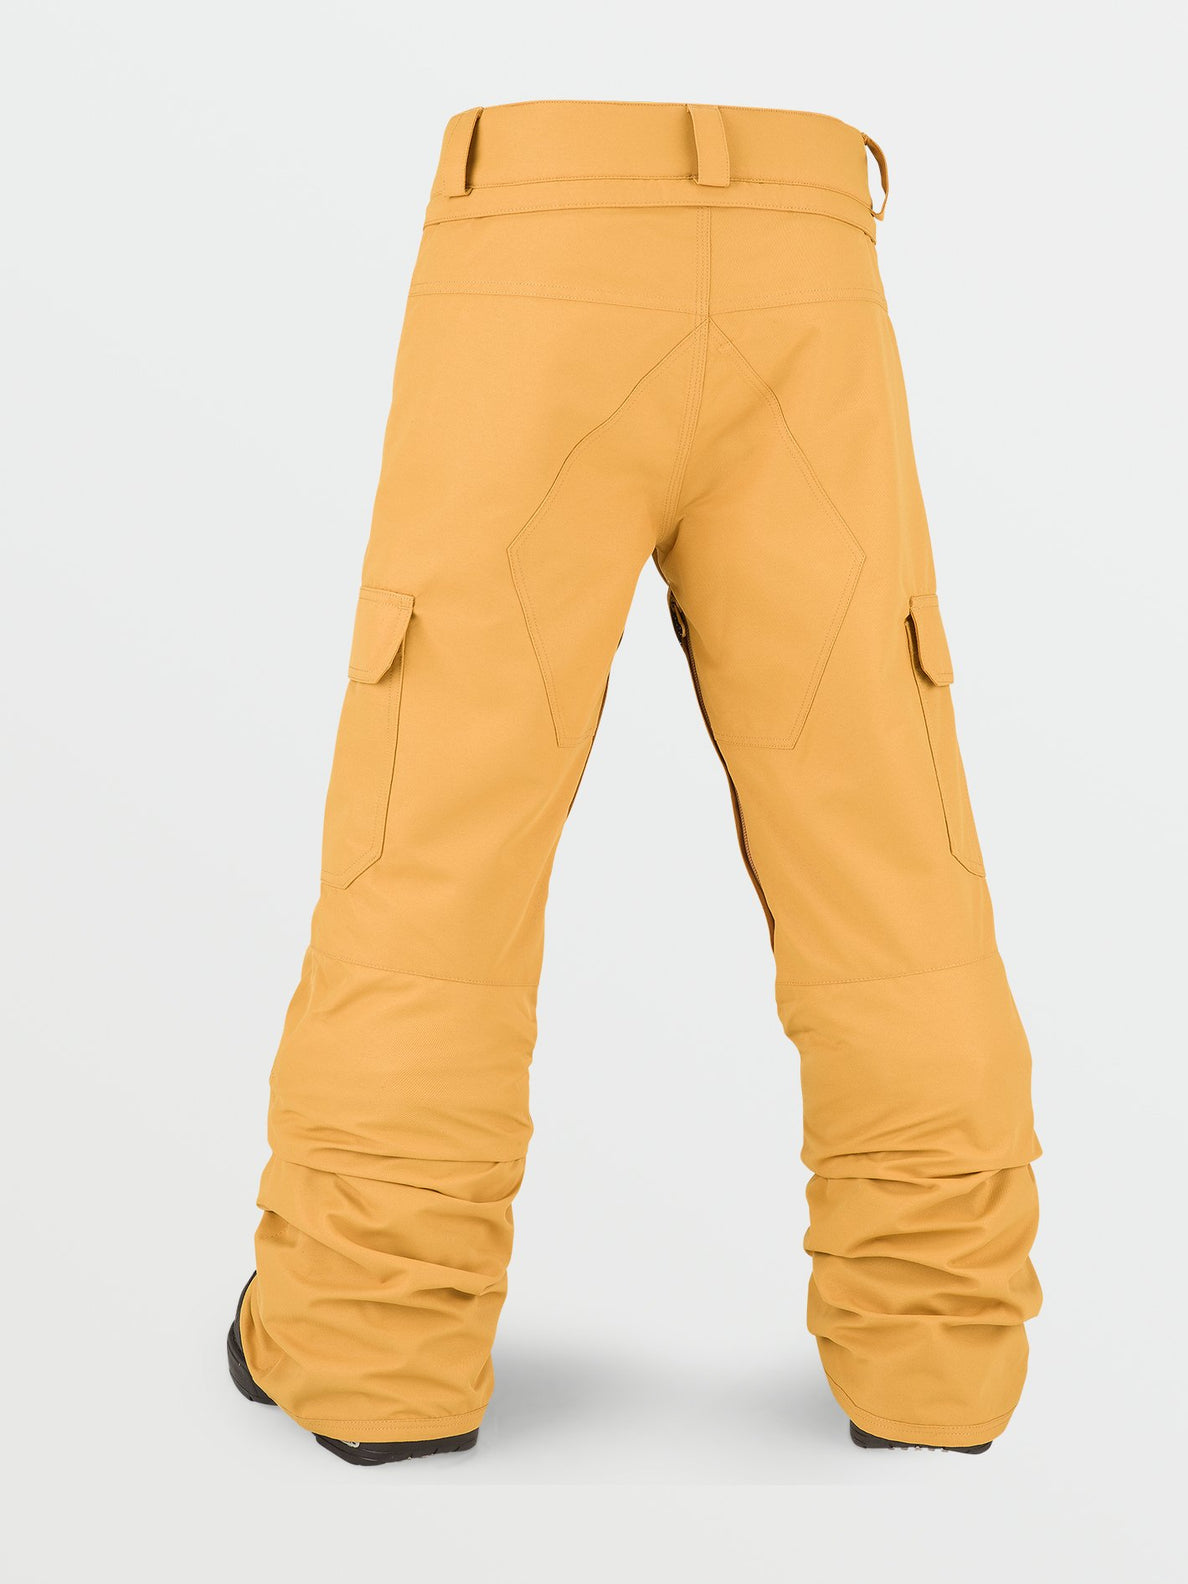 Cargo Insulated Trousers - RESIN GOLD - (KIDS) (I1252202_RSG) [B]